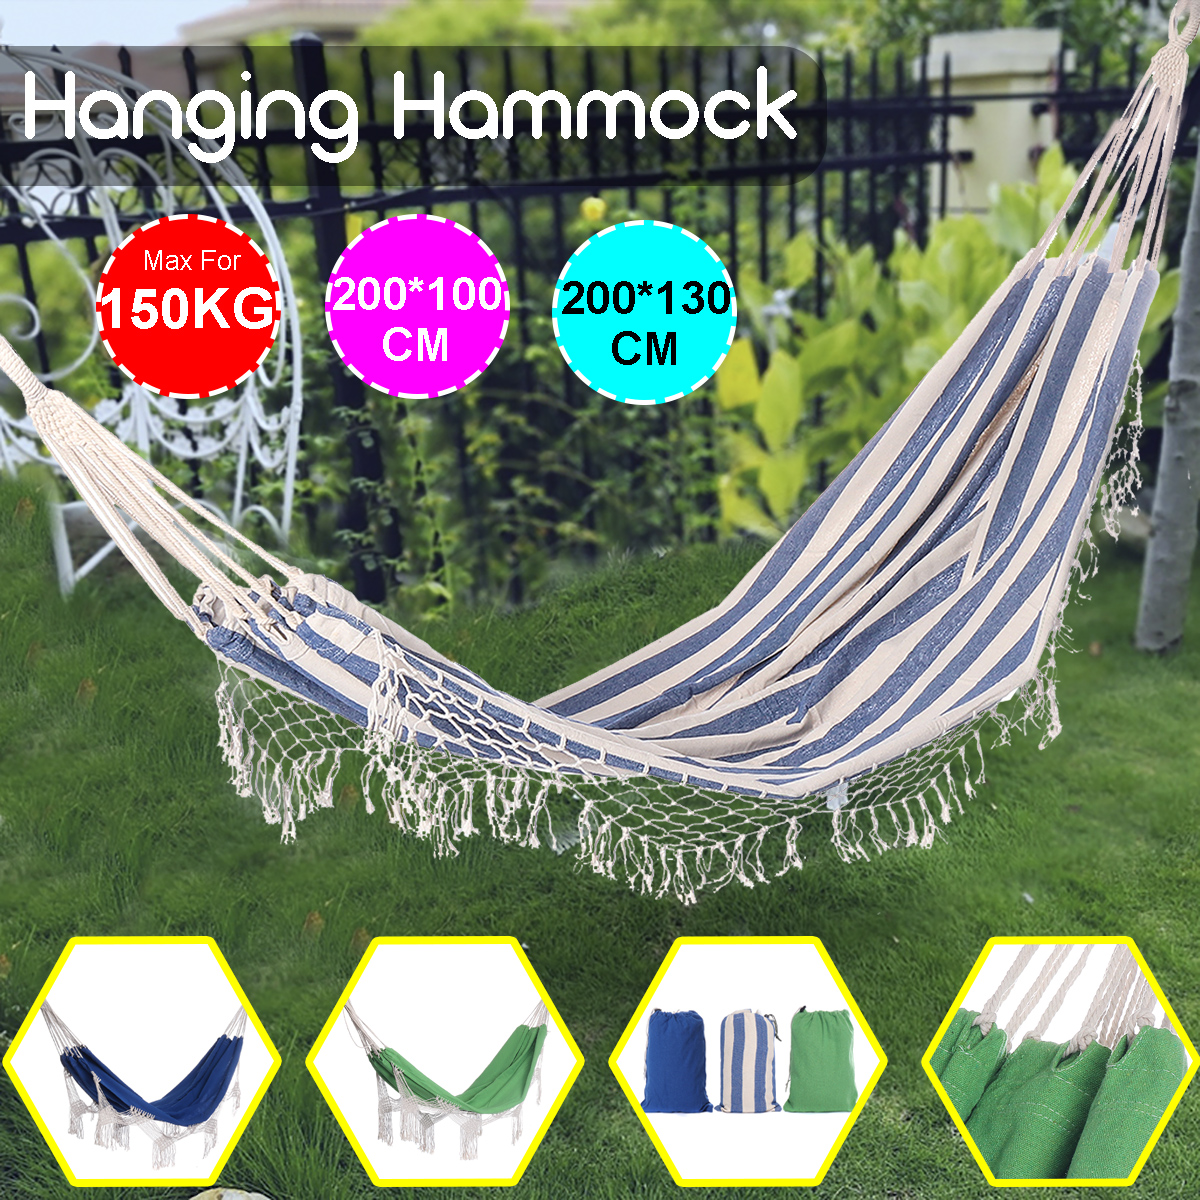 Double-Hammock-2-Person-Extra-Large-Canvas-Cotton-Hammock-for-Patio-Garden-Backyard-Lounging-Outdoor-1696526-1